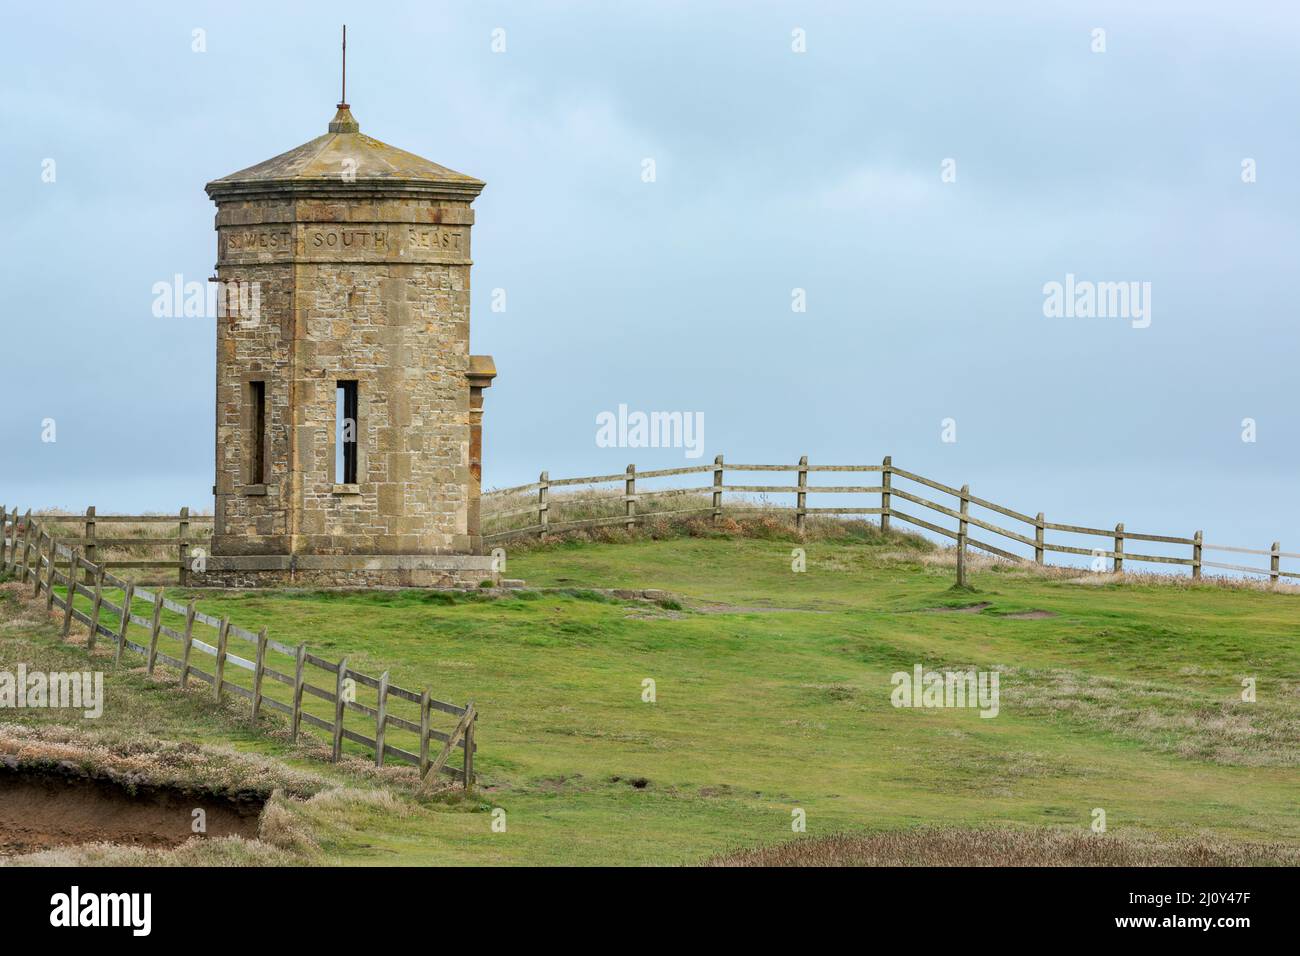 BUDE, CORNWALL, UK - AUGUST 15 : Compass Tower on the cliff top at Bude , Cornwall on August 15, 2013 Stock Photo